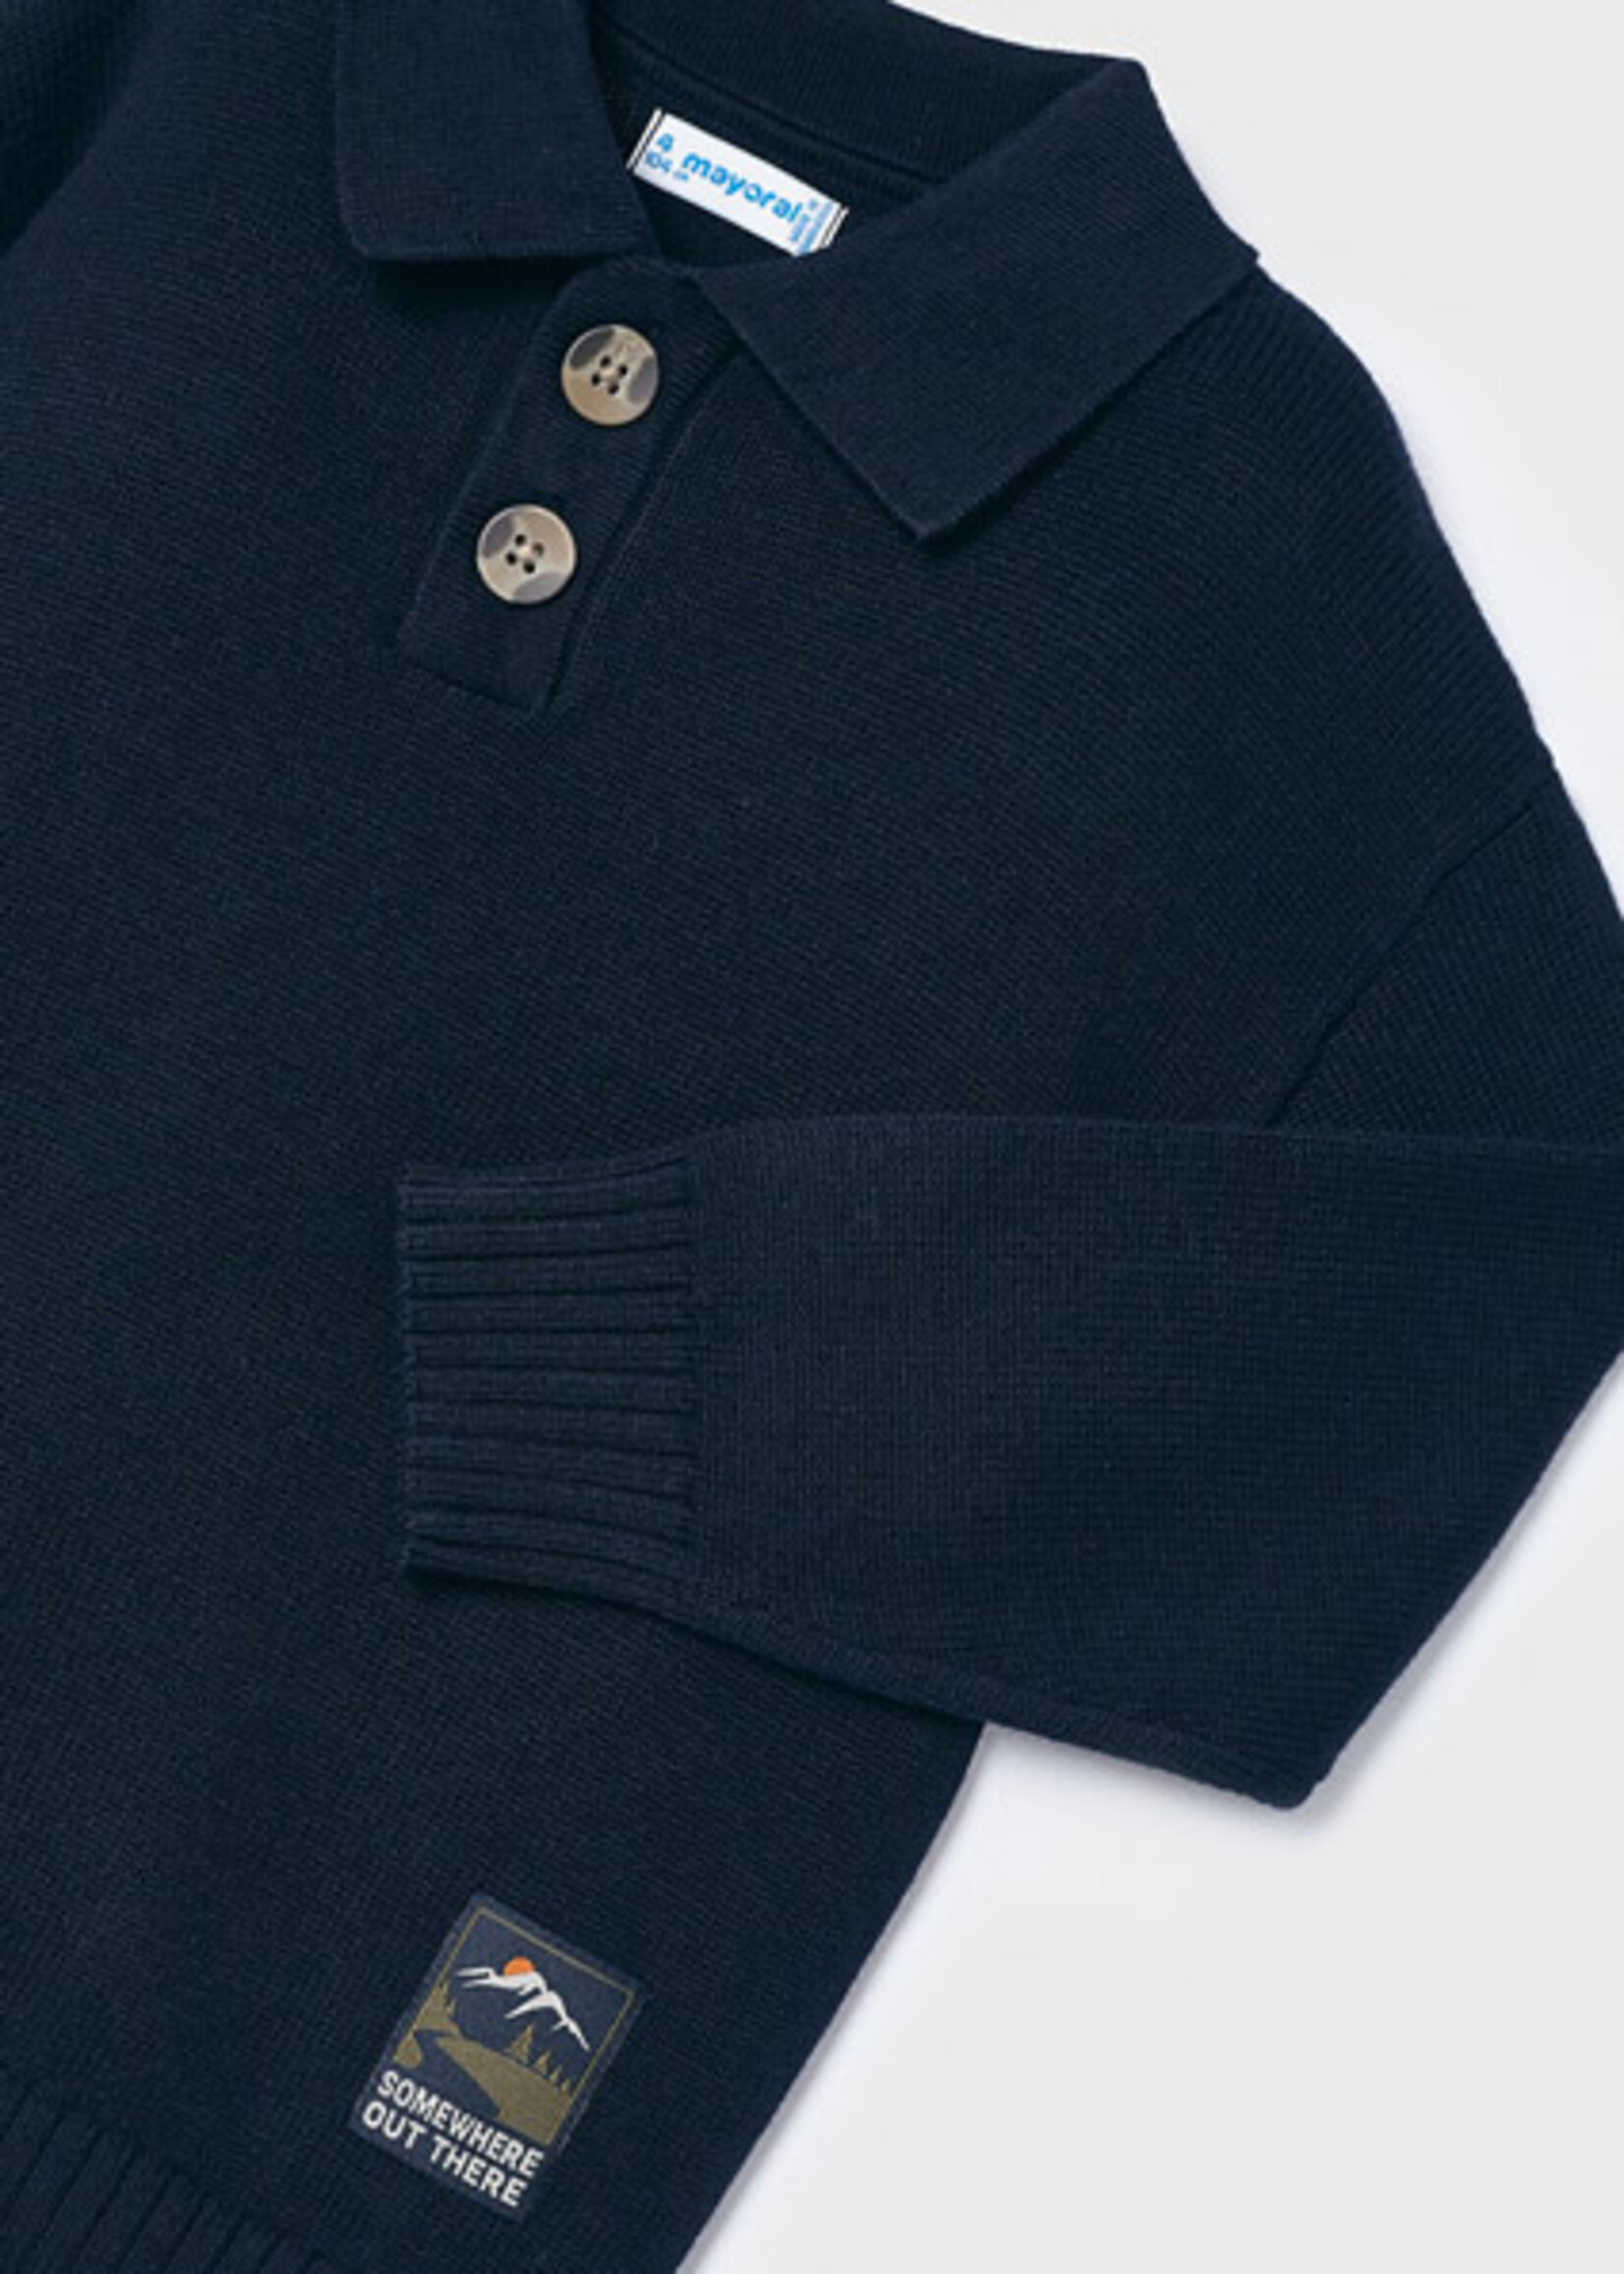 Mayoral polo sweater navy